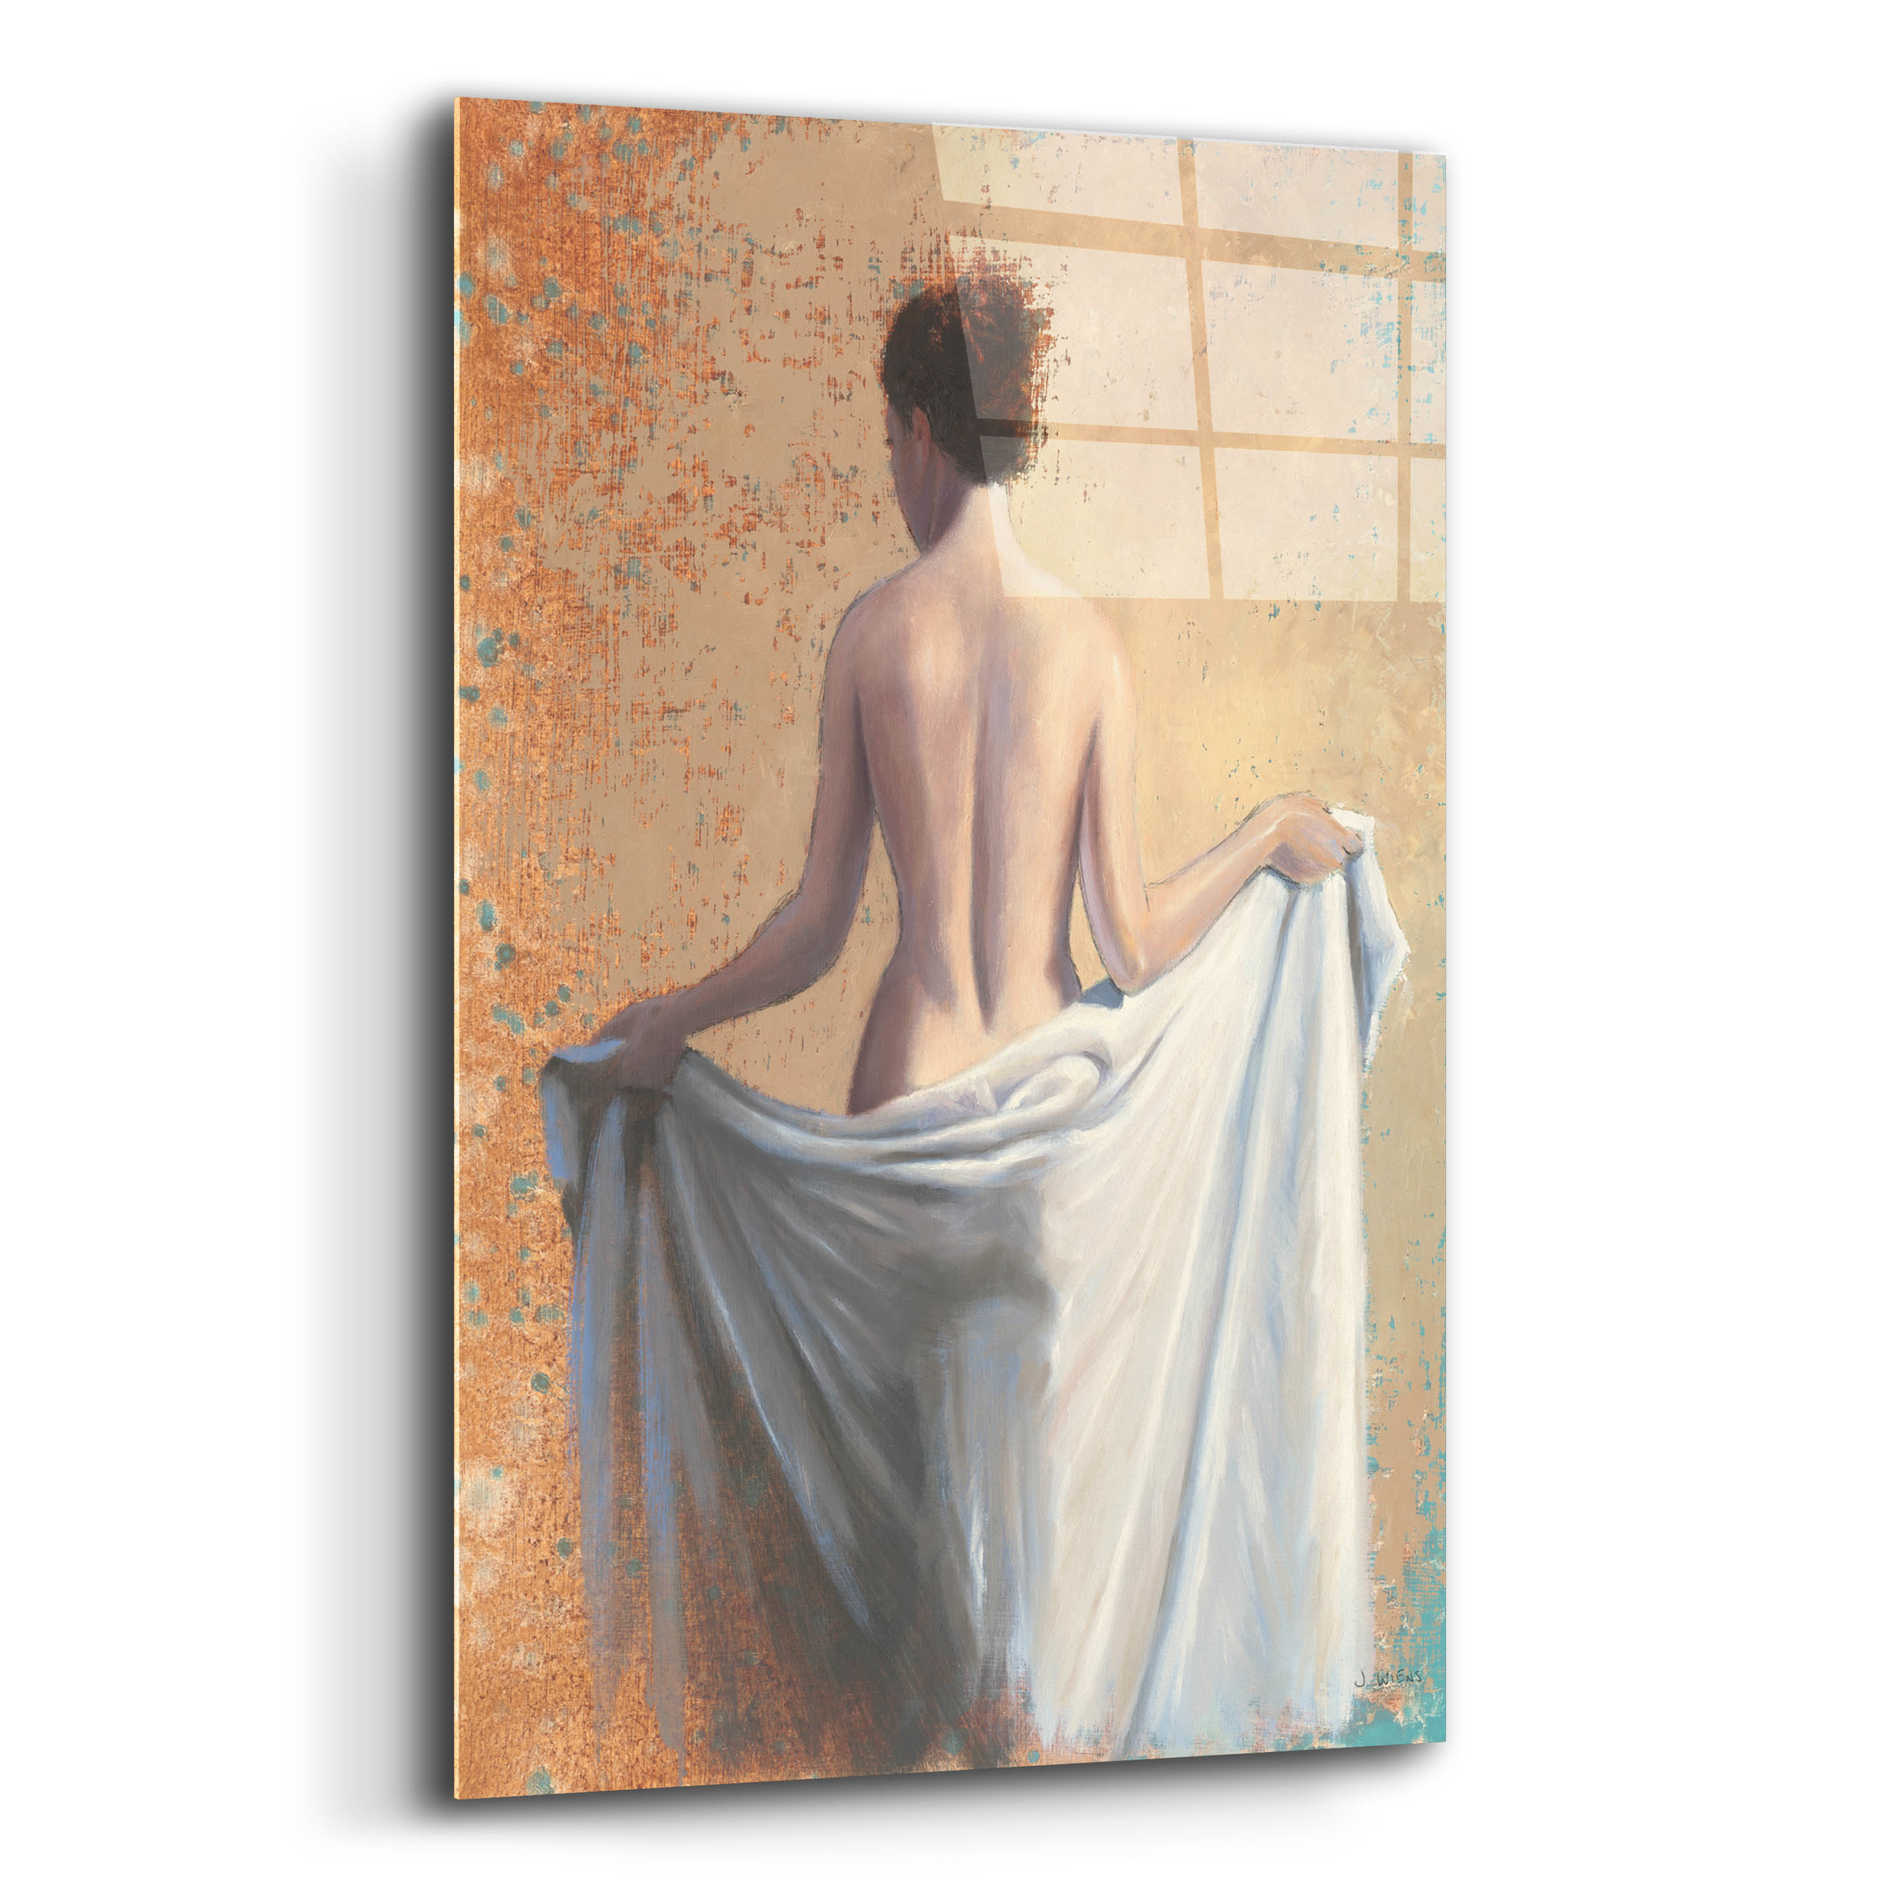 Epic Art 'After the Bath Coral' by James Wiens, Acrylic Glass Wall Art,12x16